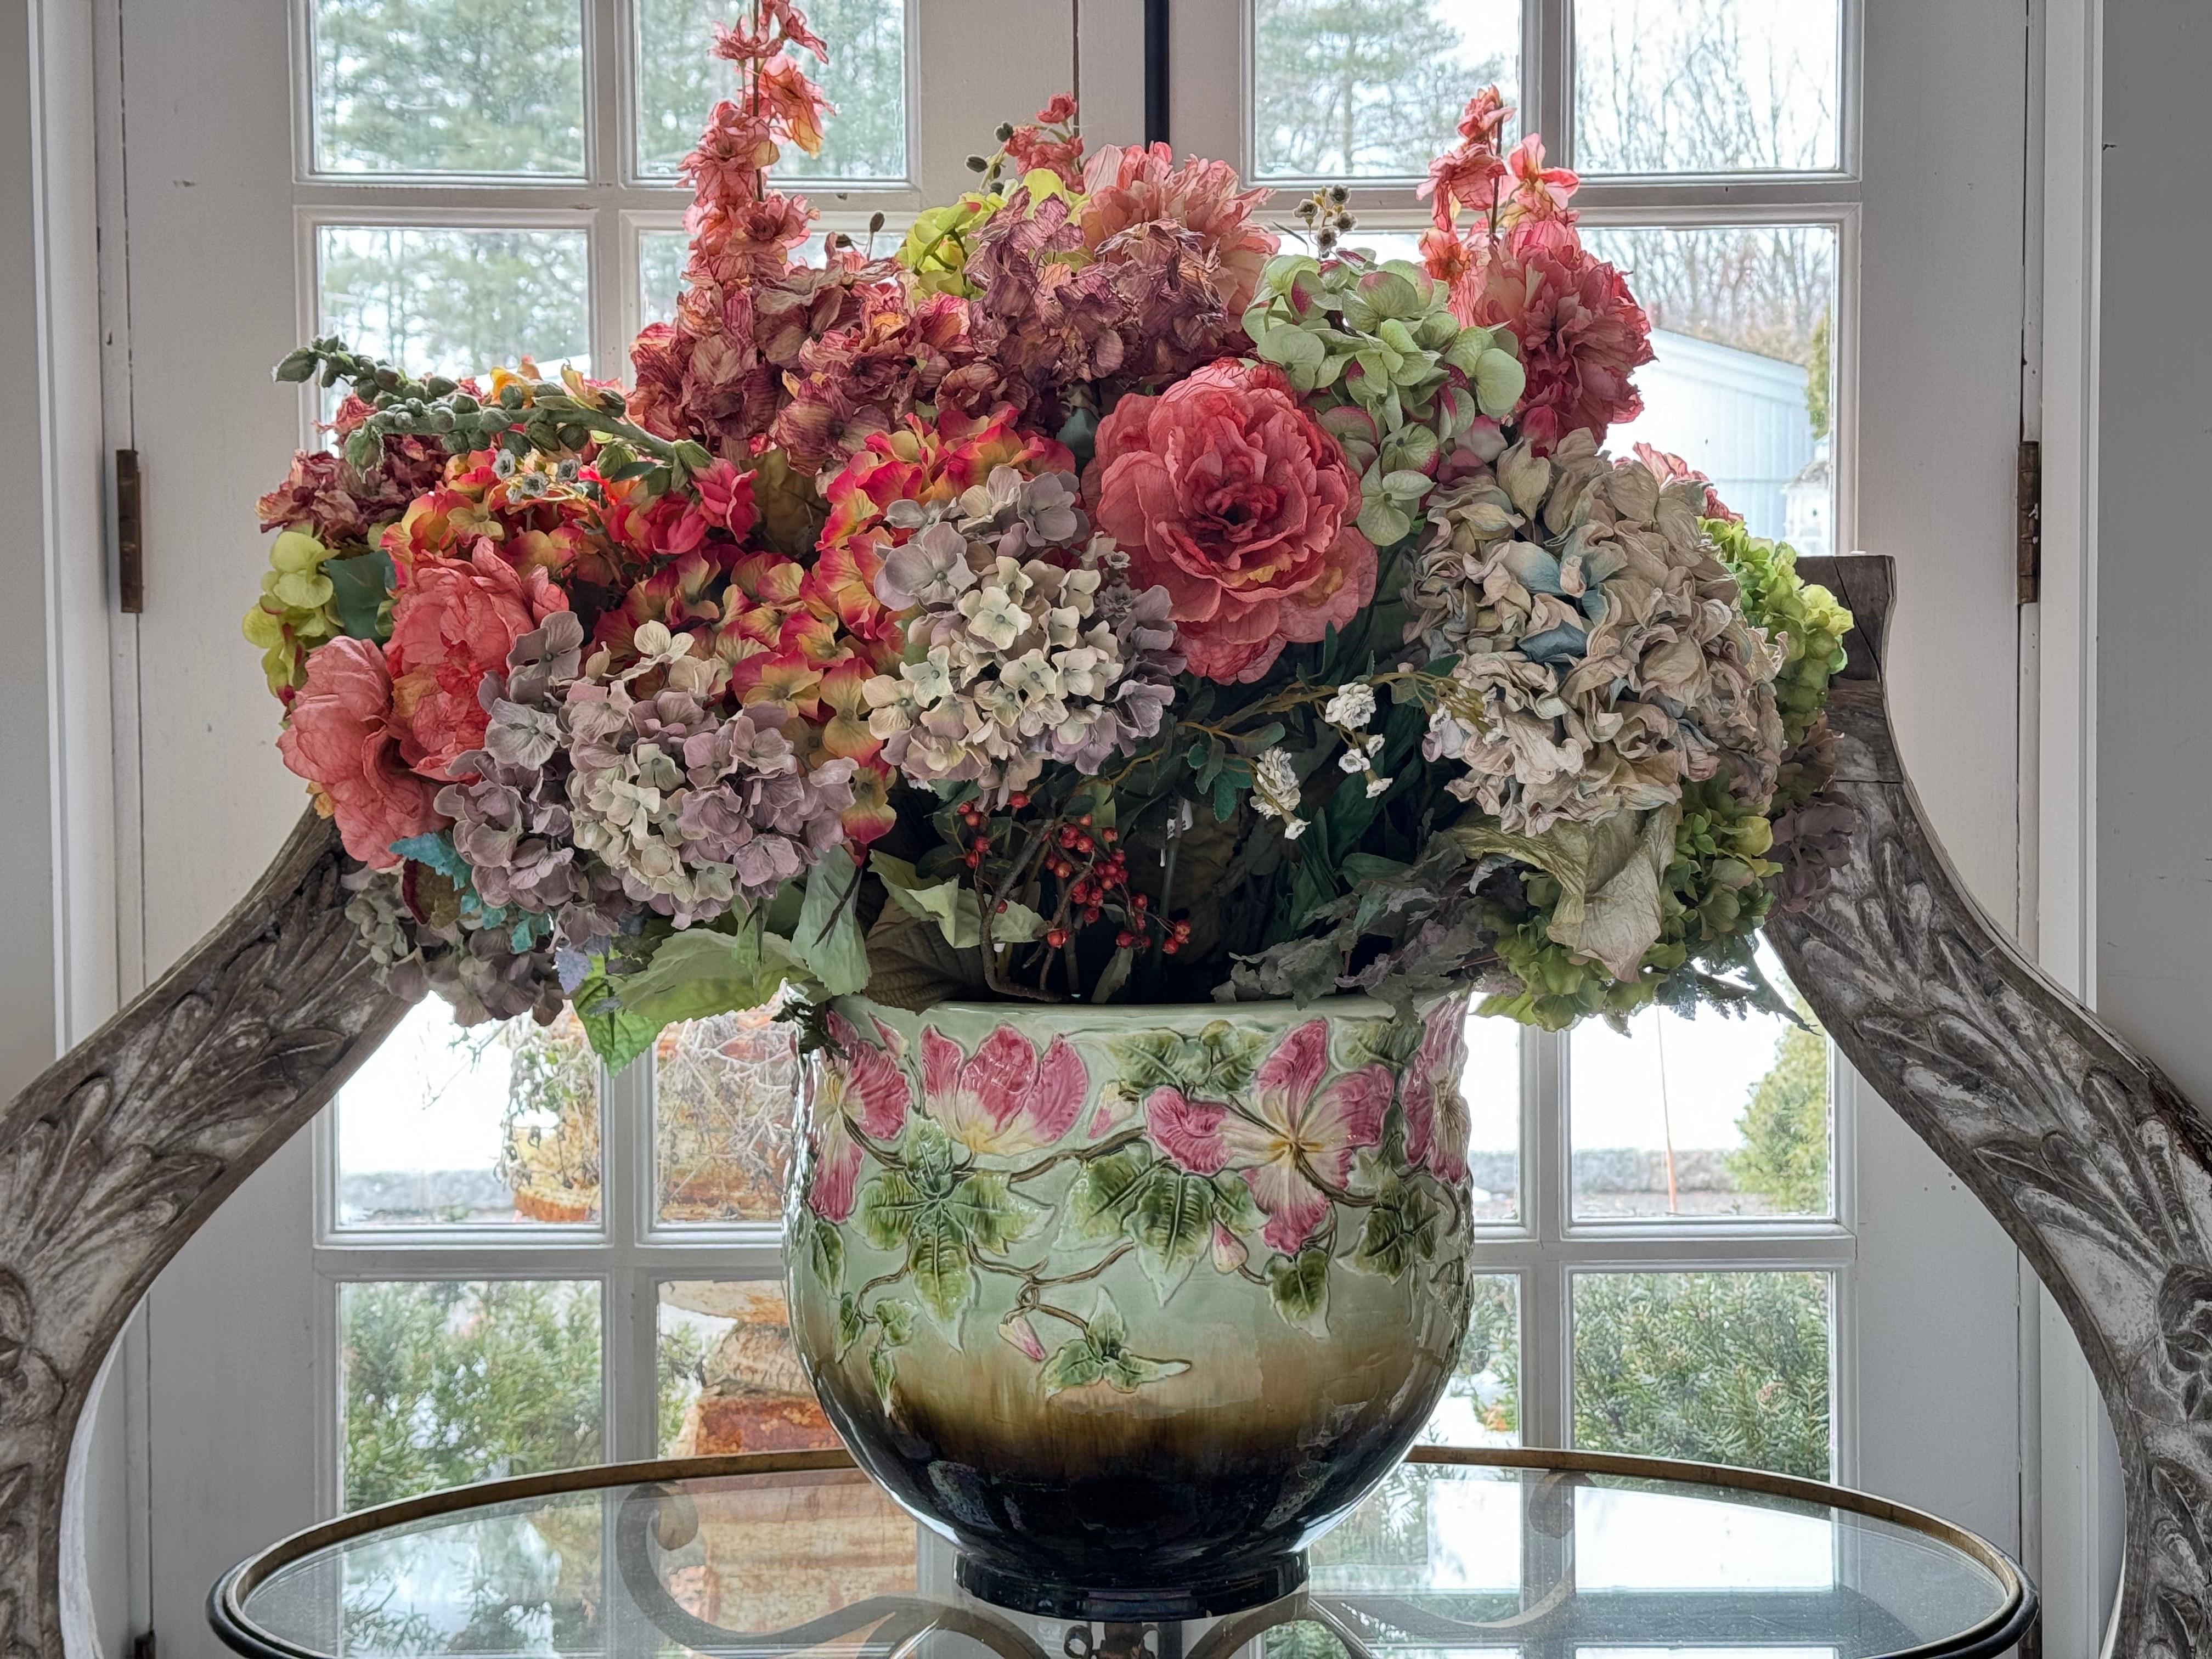 Large English Ceramic Jardiniere with Silk Flowers. Beautiful and colorful bouquet to brighten any room. The jardiniere is stamped on the bottom. Will post better photos soon. Cermic planter height is 13